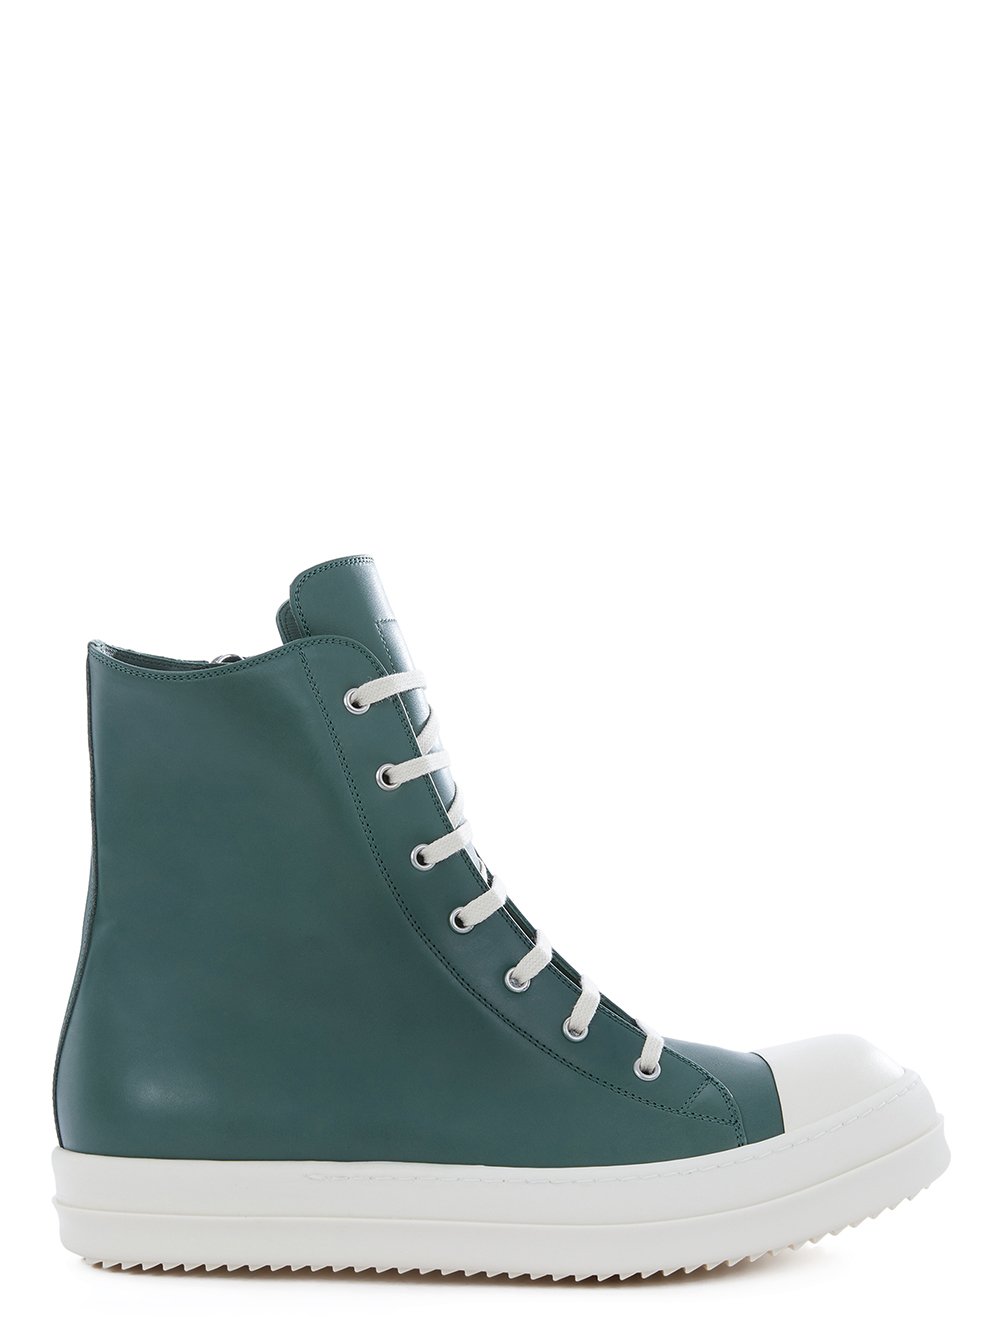 Rick Owens RICK OWENS FW22 STROBE SNEAKERS IN TEAL AND MILK WHITE CORTINA GREASE CALF LEATHER